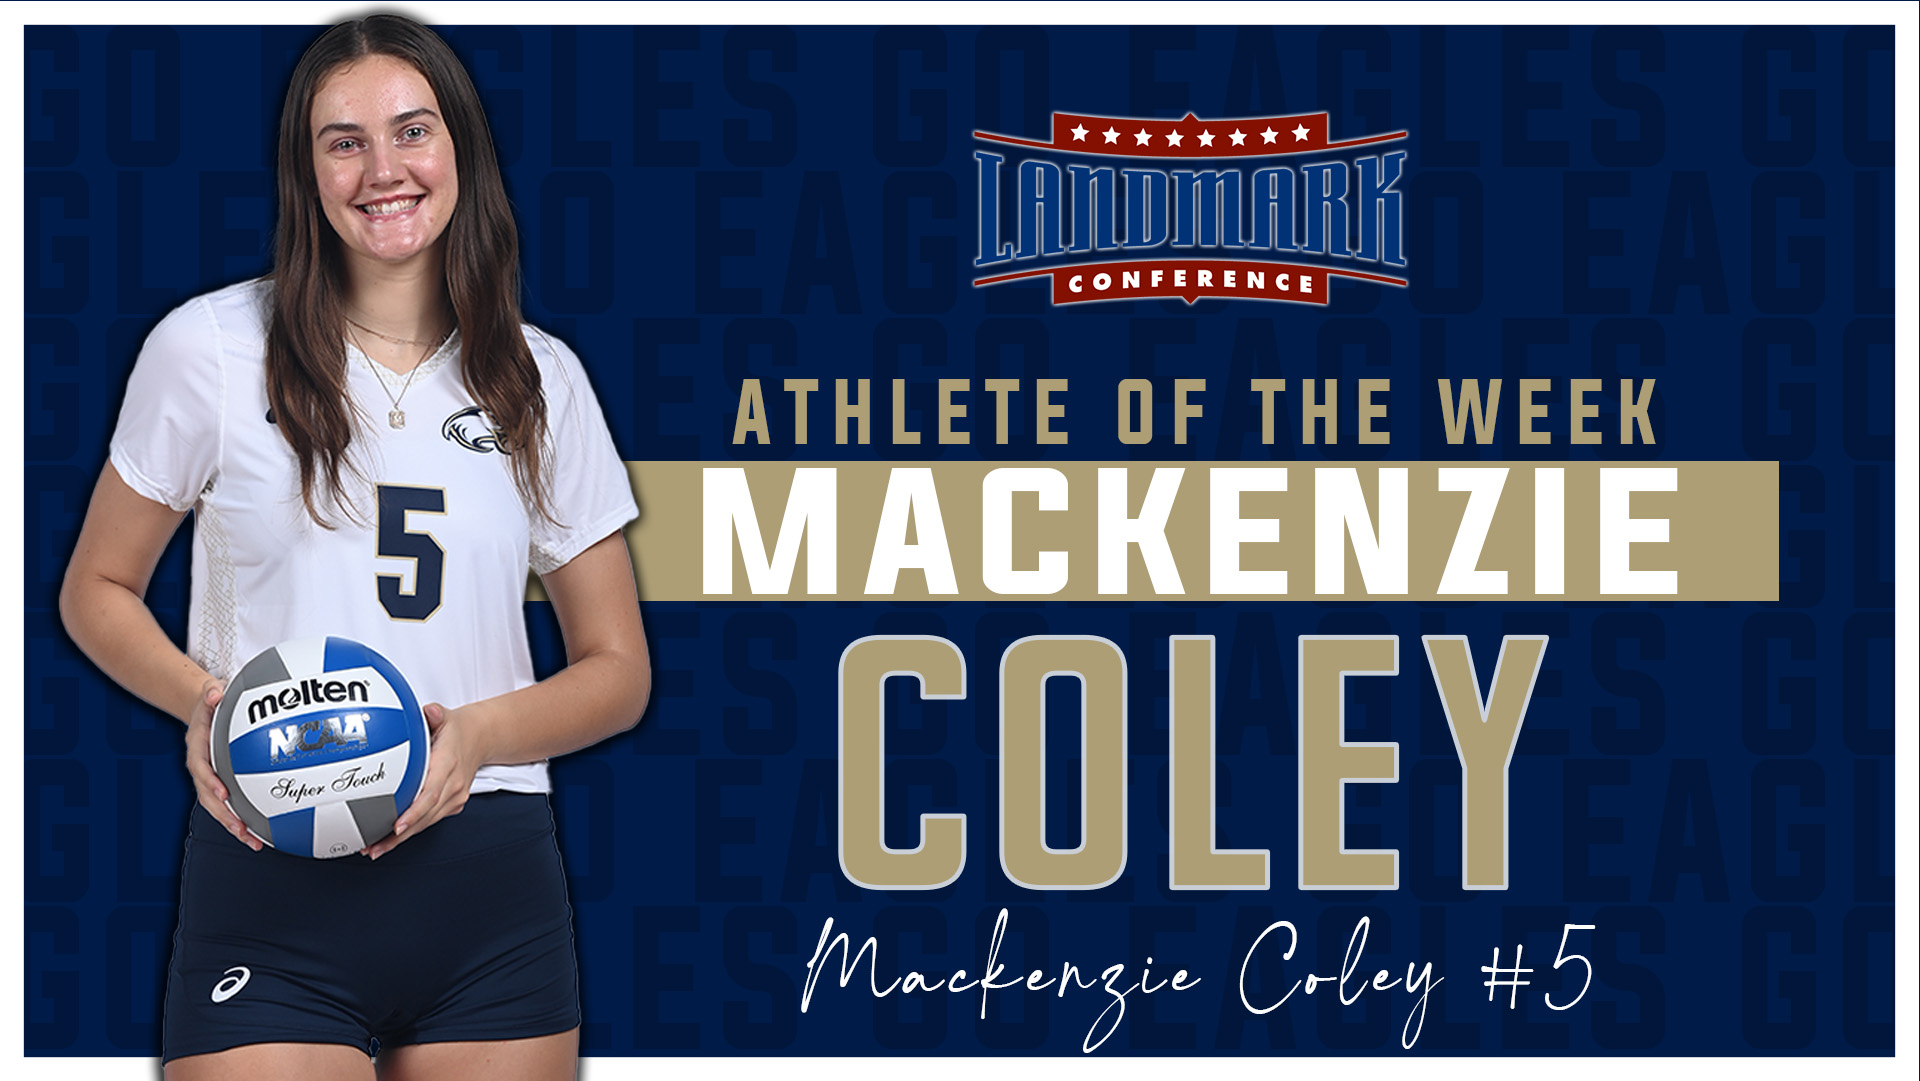 Coley Named Landmark Conference Athlete of the Week for the Second Time